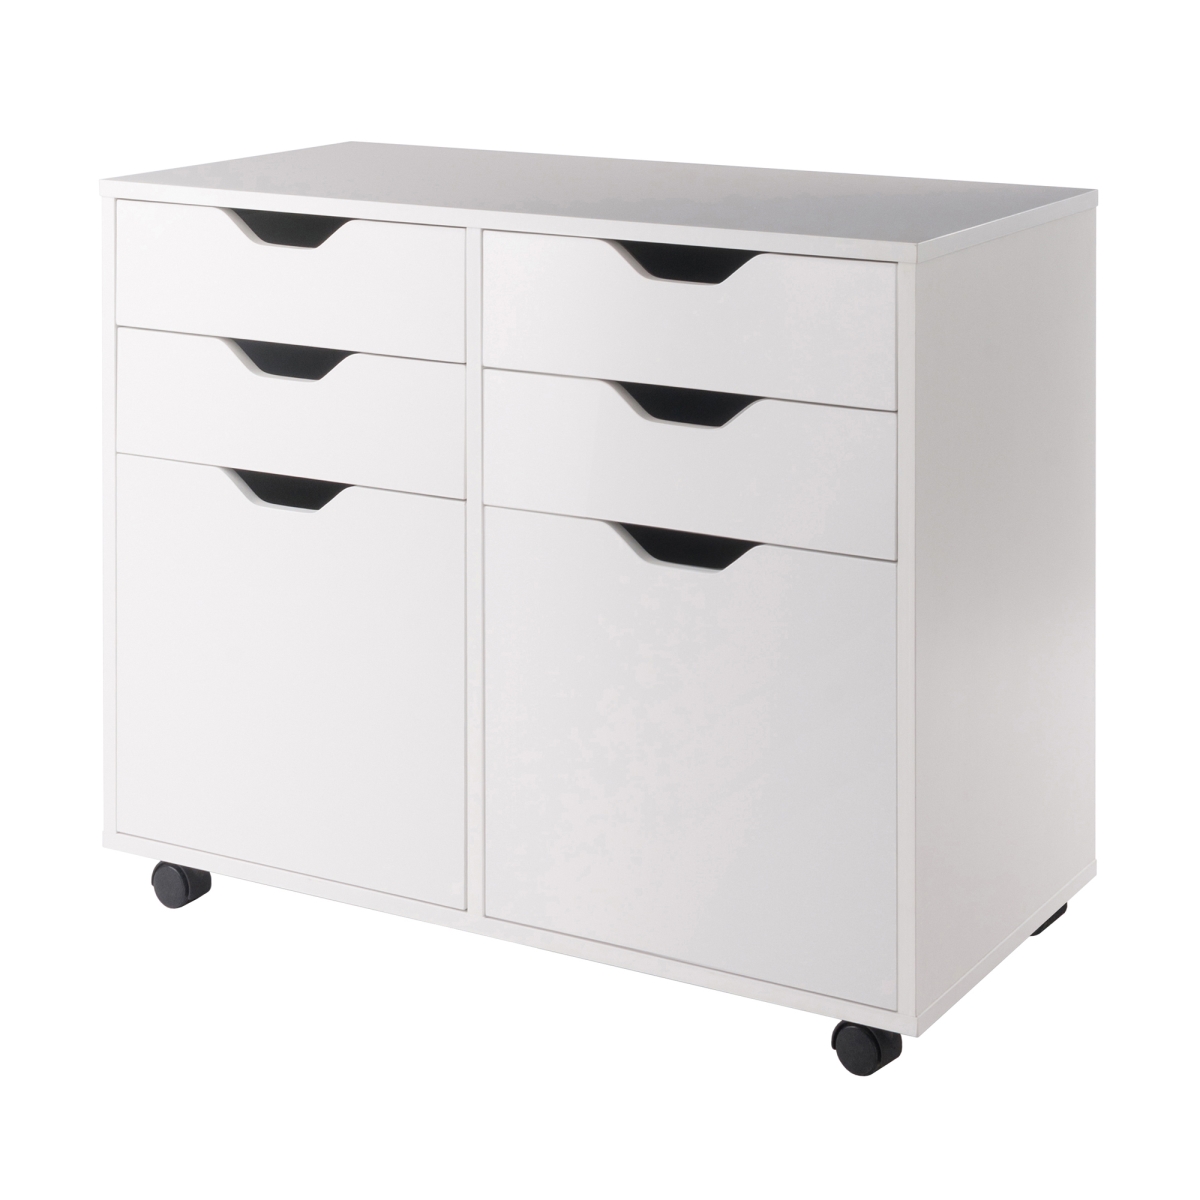 10622 26.3 X 32.1 X 15.9 In. Halifax 2 Section Mobile Storage Cabinet, White